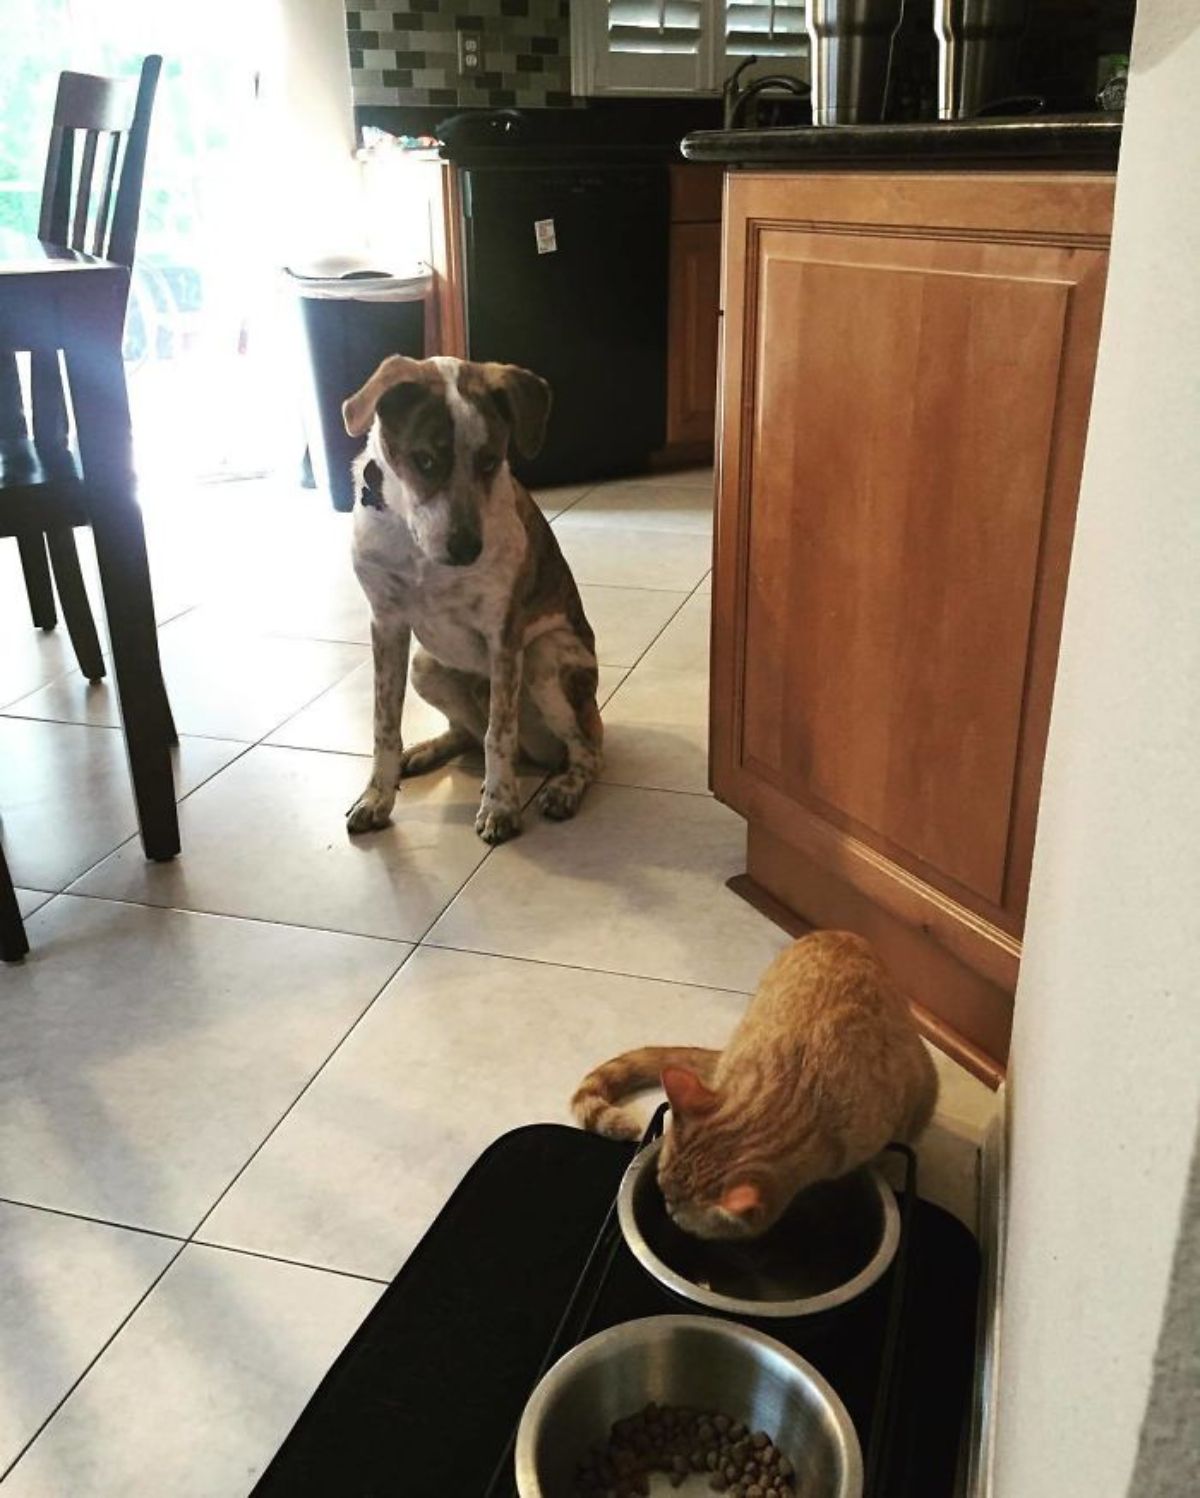 orange cat drinking out of a silver dog water bowl while a white and brown dog sits and watches